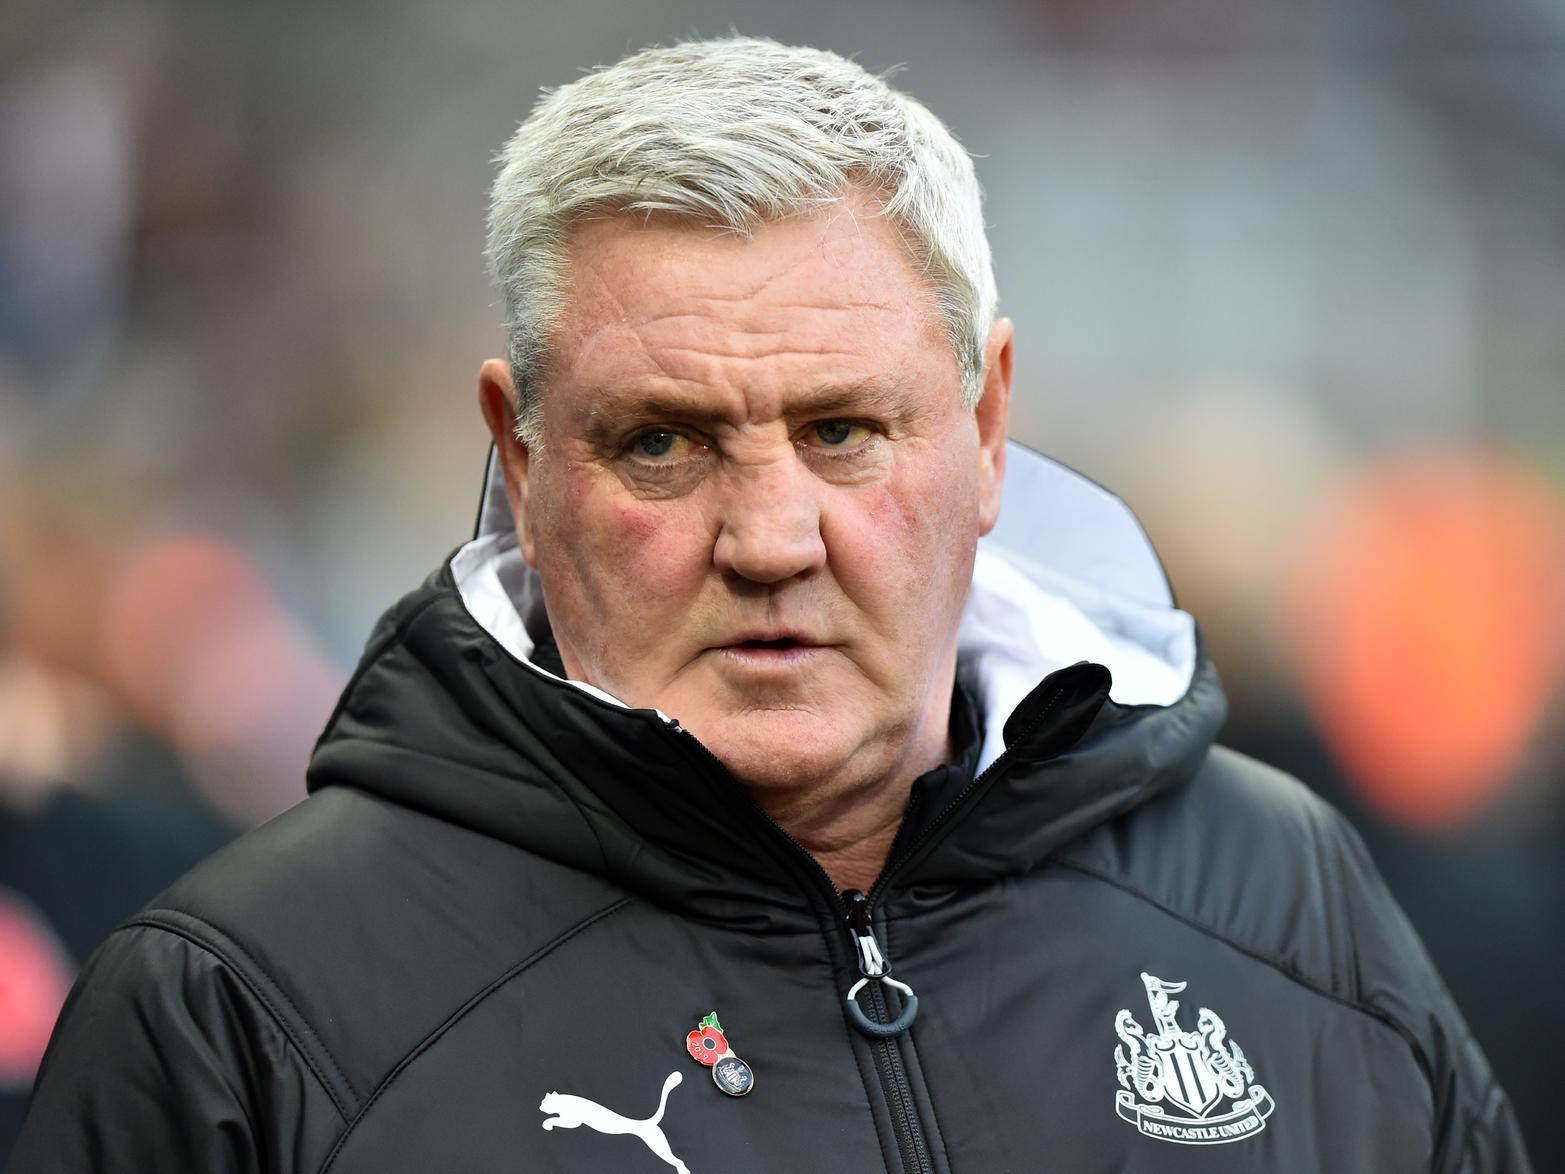 Brucey is back in town on the Monday night kick-off, when Newcastle United travel to Villa Park. He's been bullish in his pre-match presser, claiming he wants to go back there and beat them. They last won at Villa in 2013.